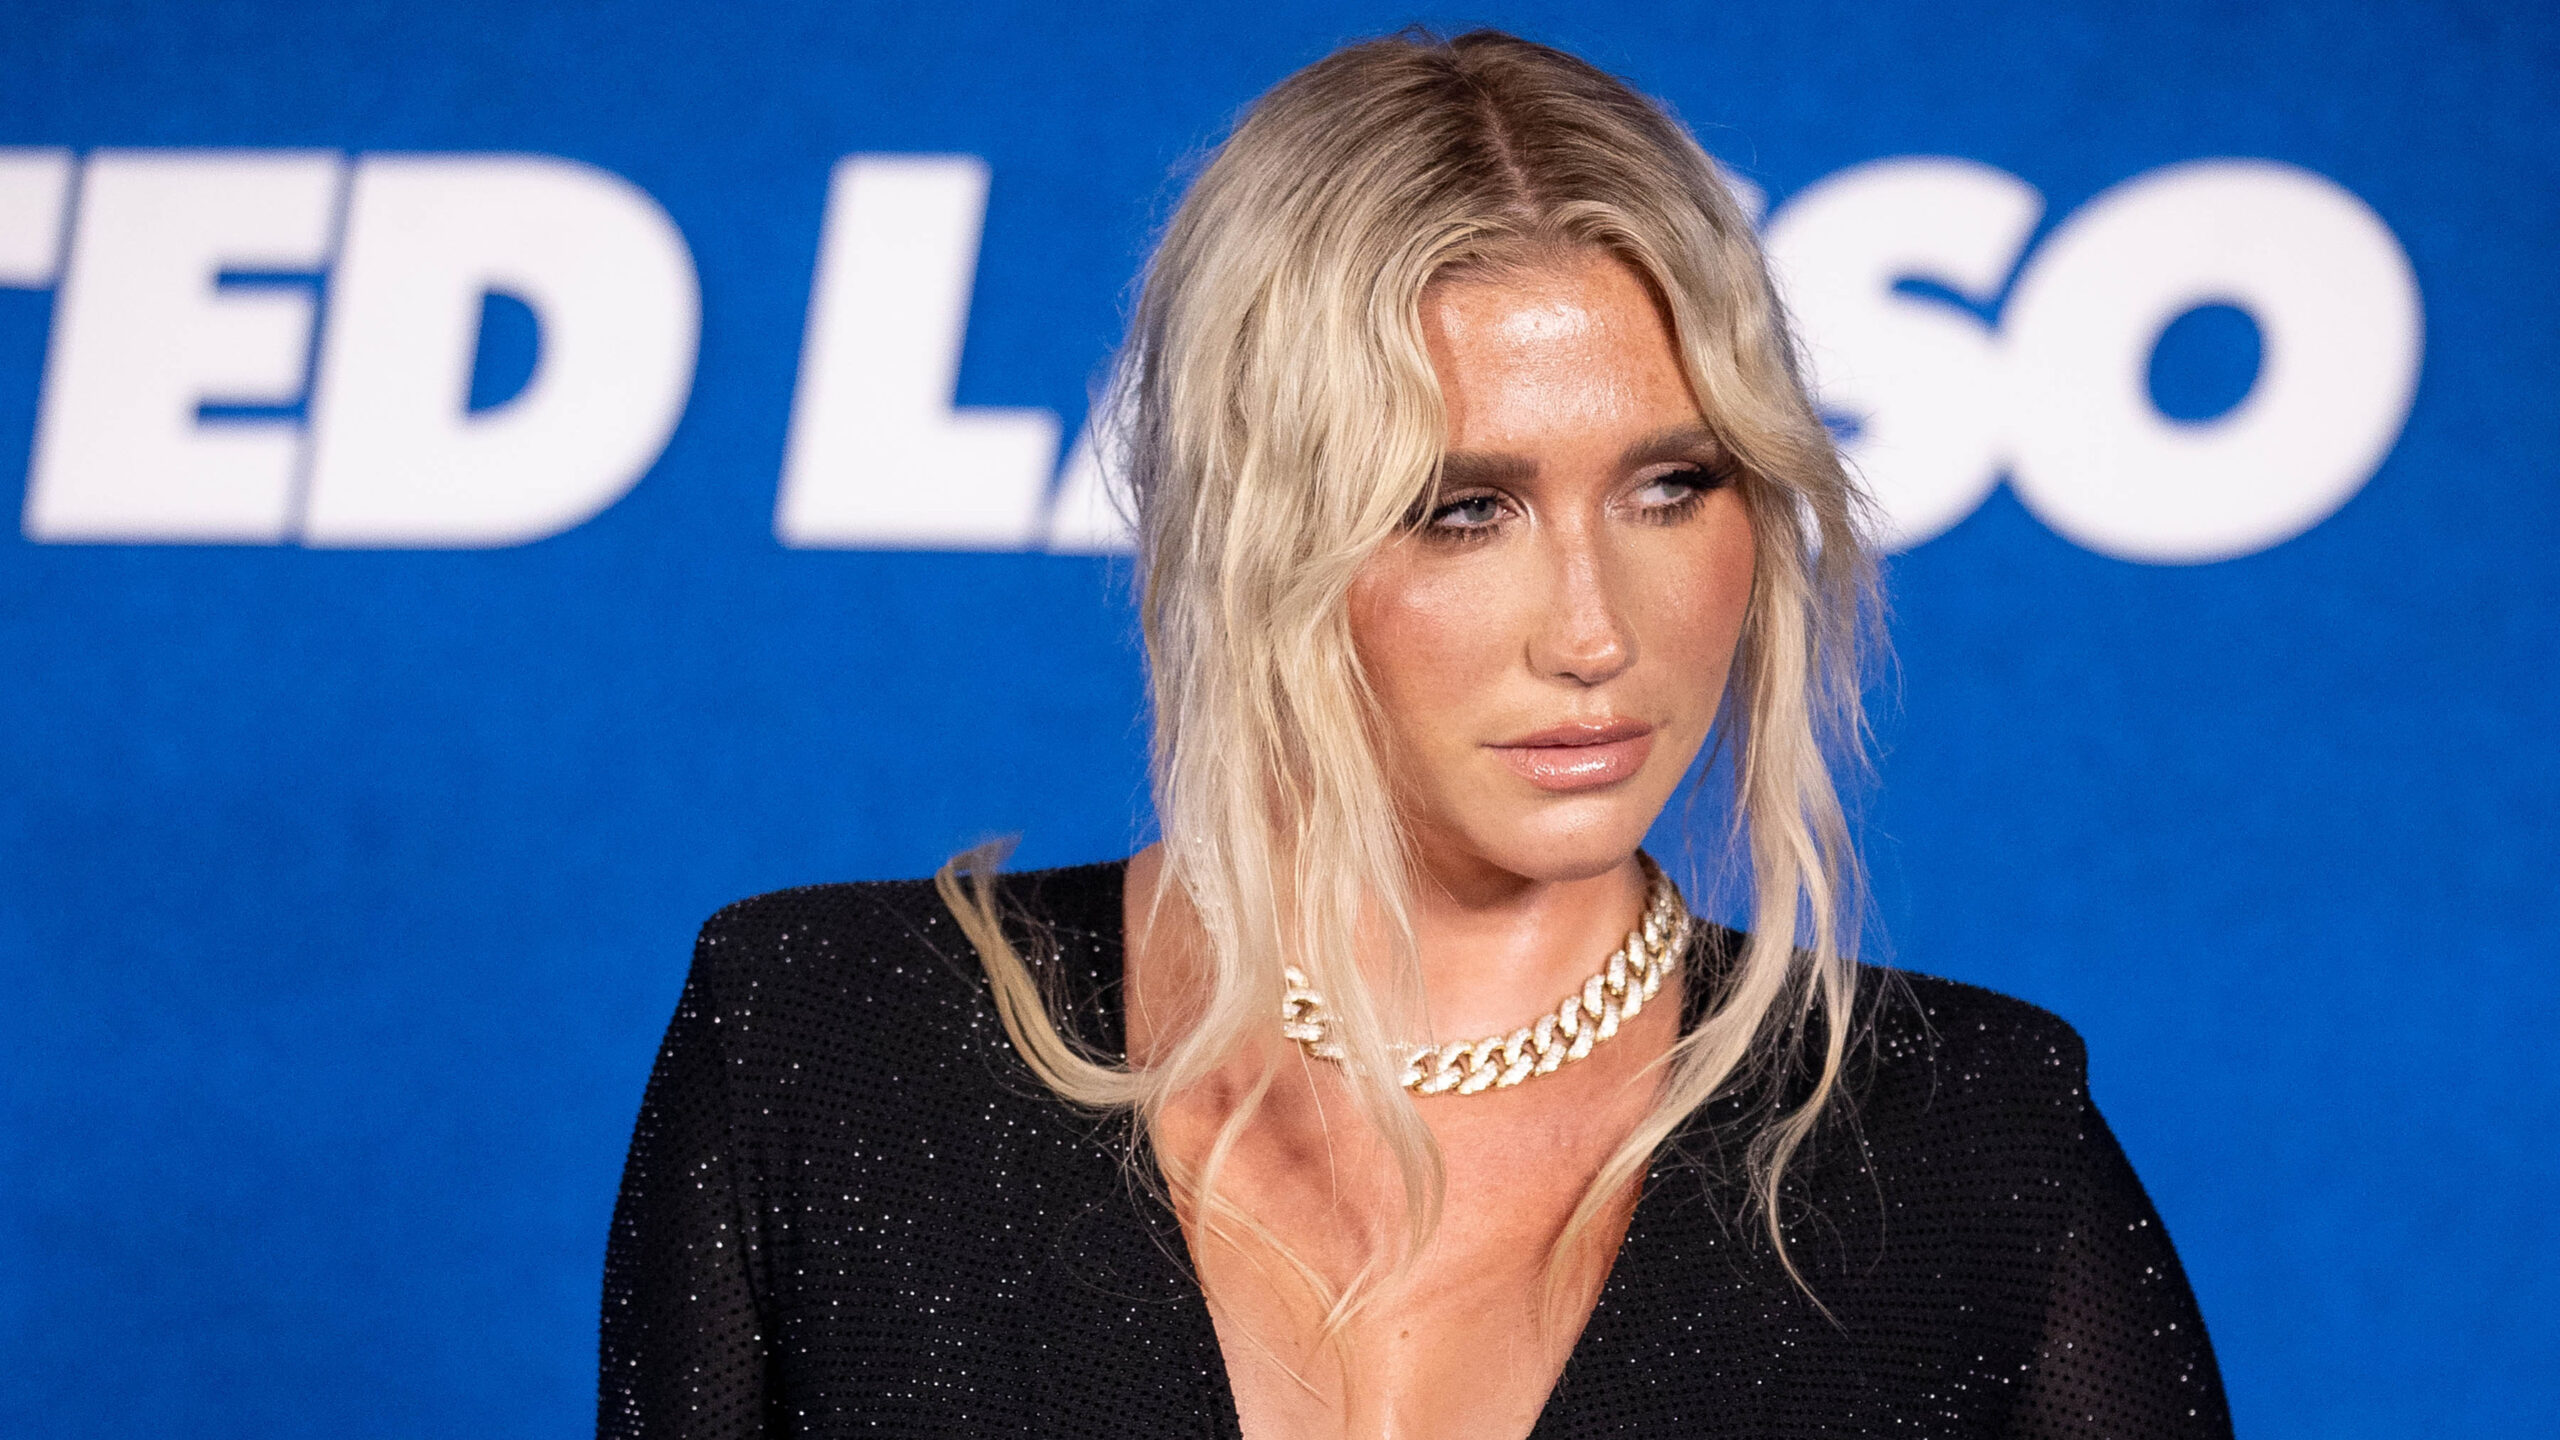 Kesha experienced severe anxiety, thought she was having a psychotic break.